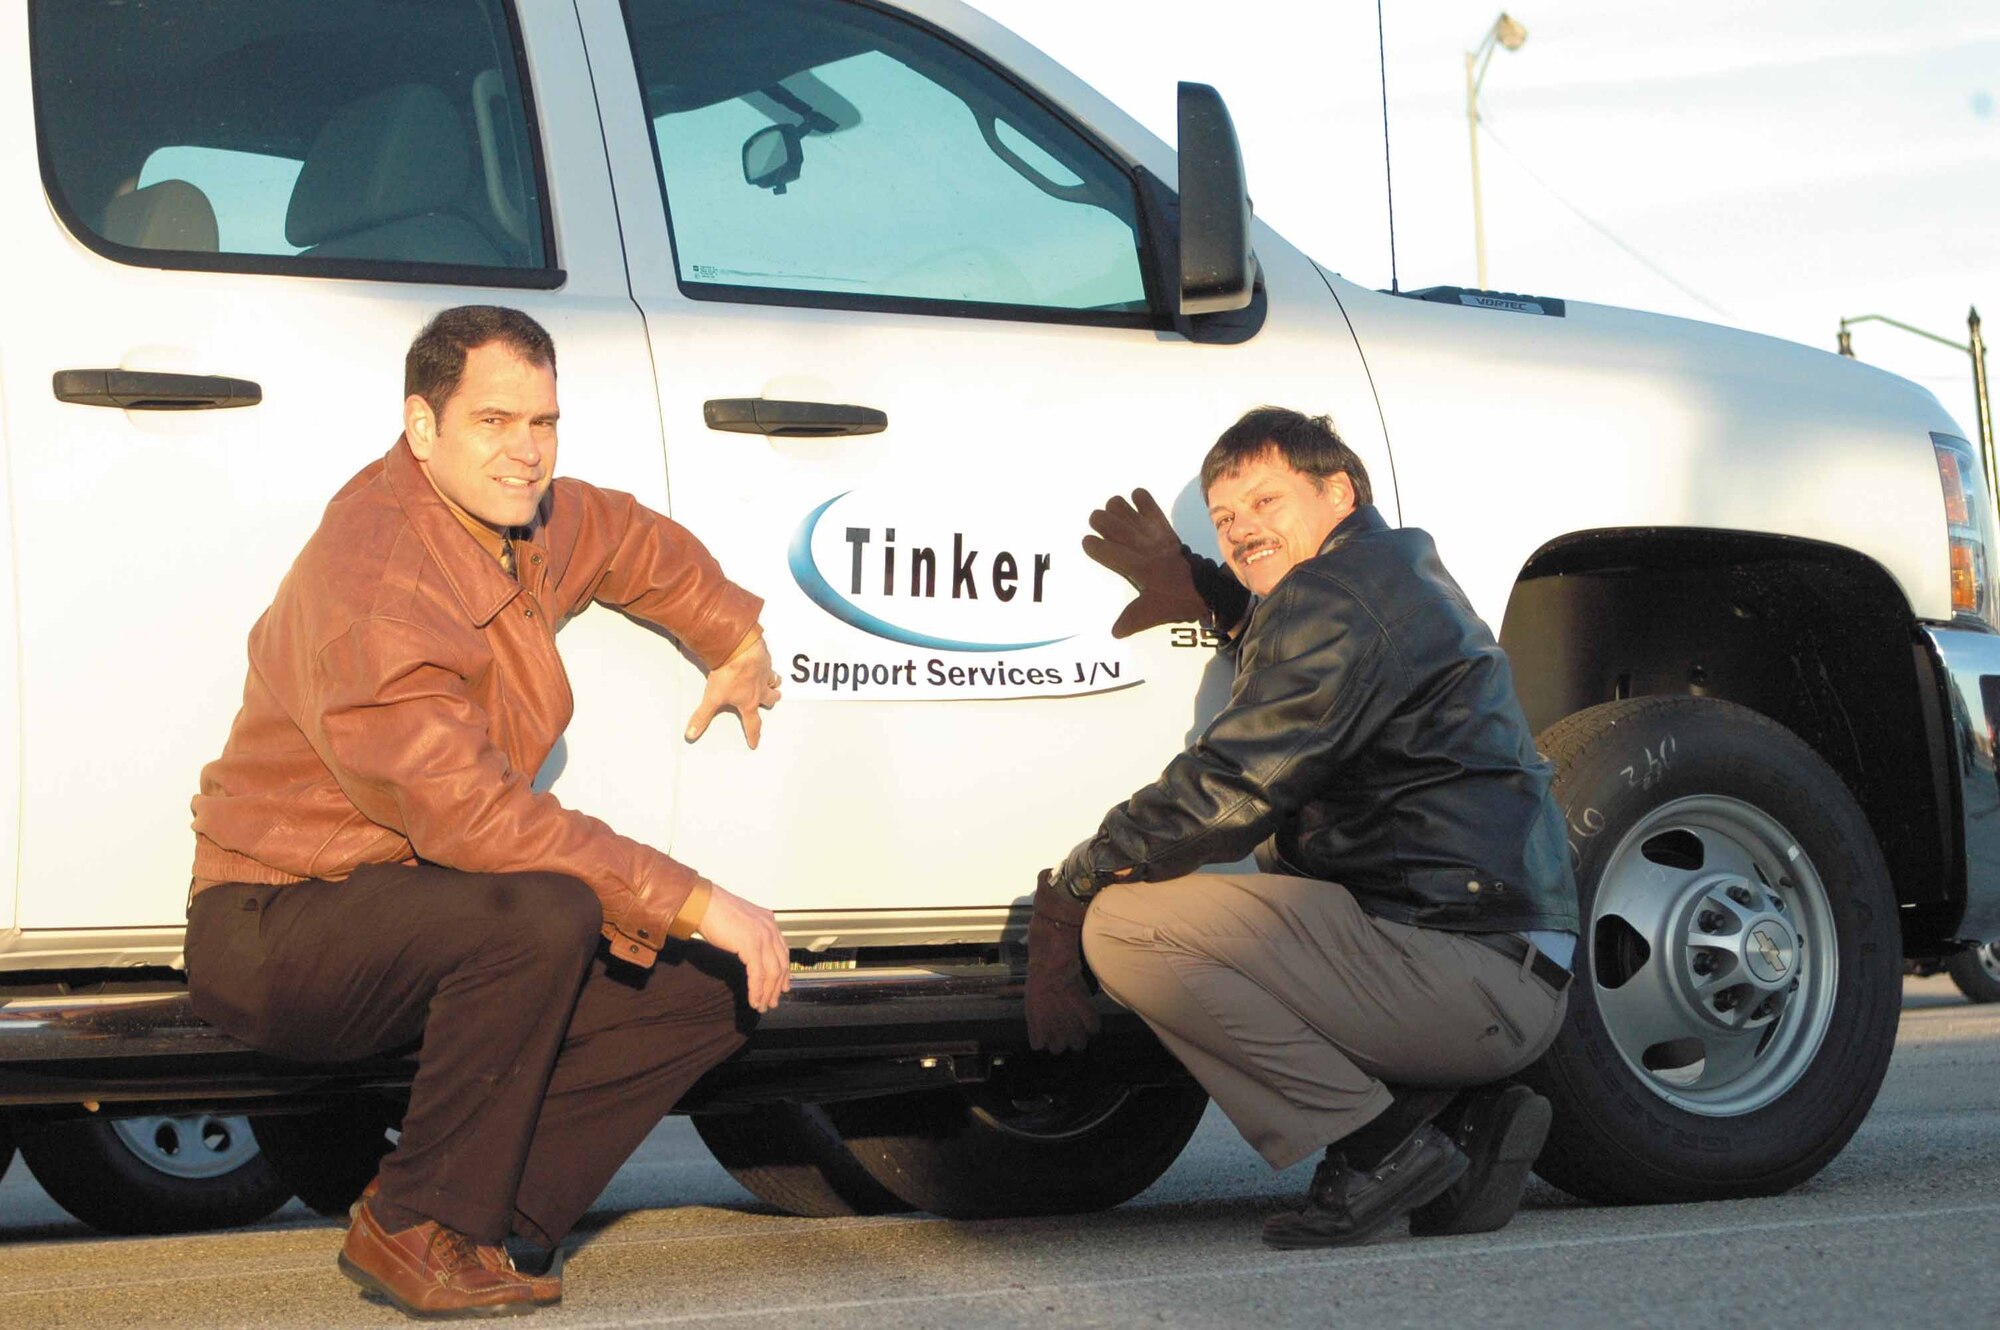 Matt DeToy, civil engineer quality assurance officer and Richard Wadhams, Tinker Support Services project manager from Chugach Alaska Corporation and Alutiiq Joint Venture are sizing up the new logo on one of the more than 130 new civil engineer support vehicle customers will see transporting crews. According to Mr. Wadhams more vehicles will allow more technicians and craftsmen to get to more job sites. “We are going to increase the number of crews while simultaneously decreasing the number of hours it takes to do the job. Doing more with less,” he said.  (Air Force photo by Brion Ockenfels)
